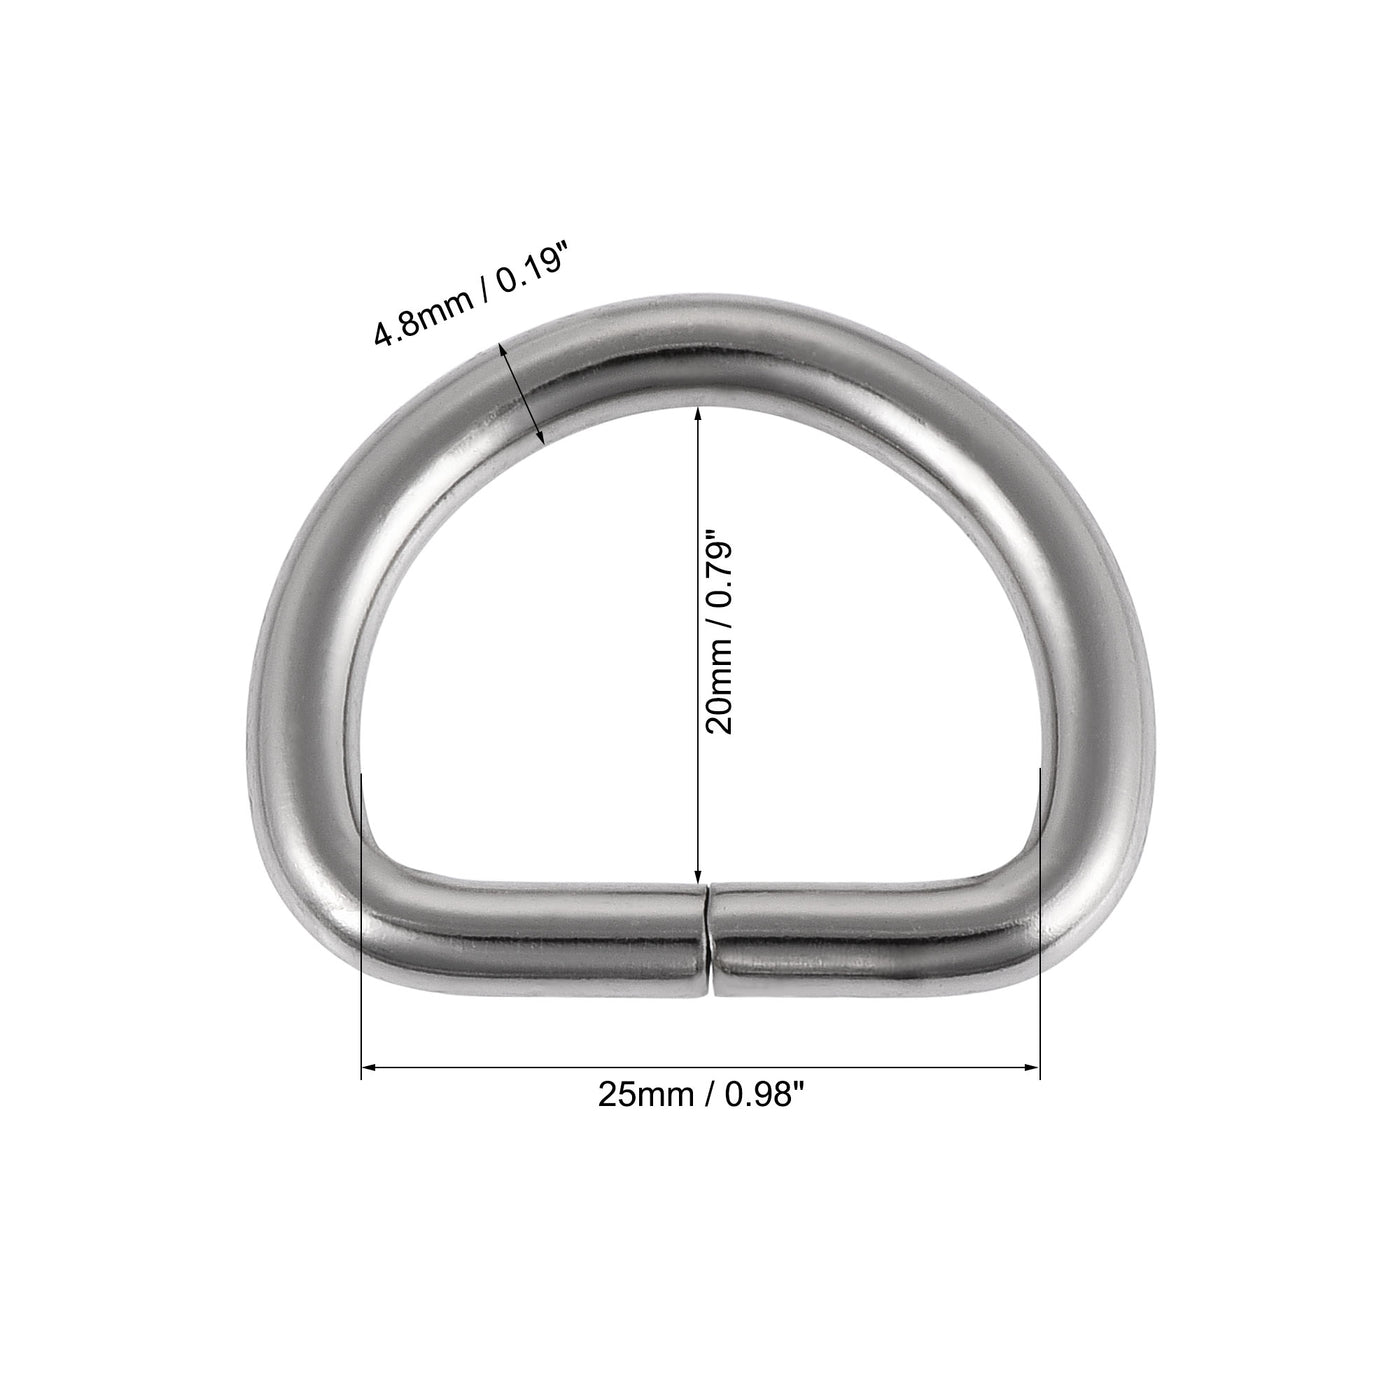 uxcell Uxcell Metal D Ring 0.98"(25mm) D-Rings Buckle for Hardware Bags Belts Craft DIY Accessories Silver Tone 12pcs